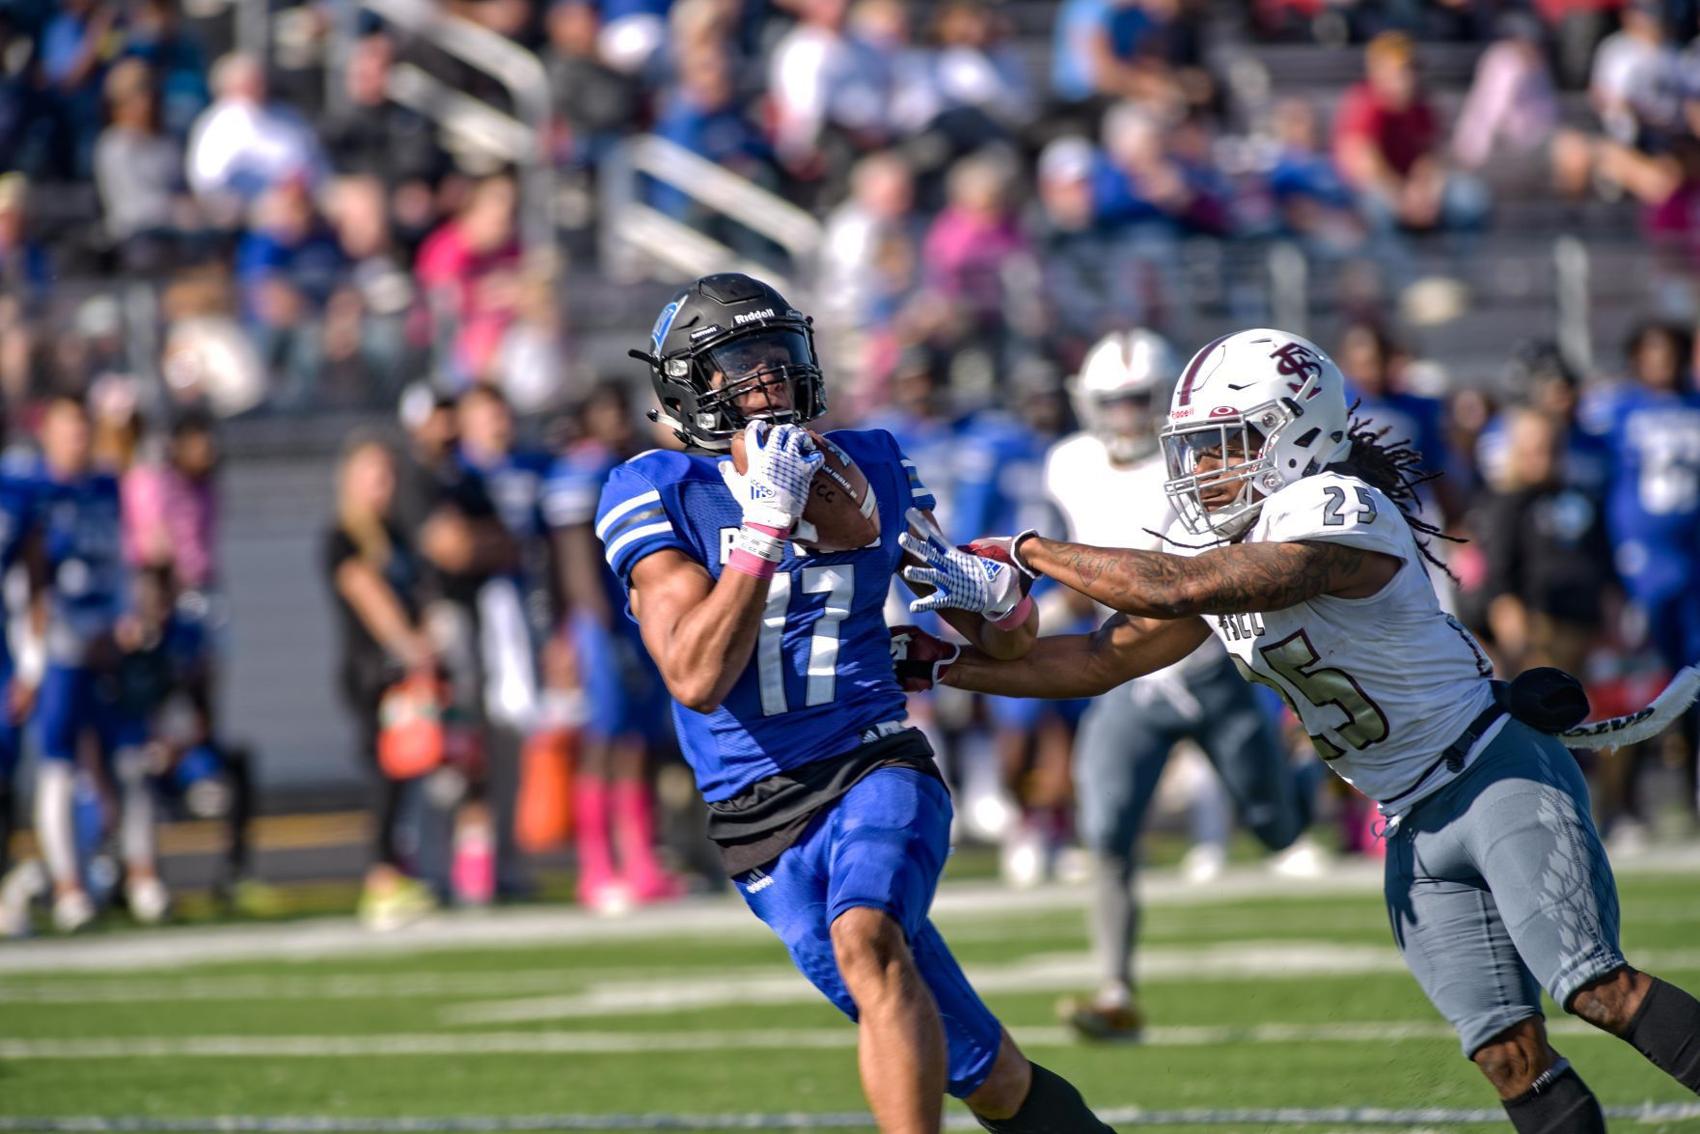 Second-ranked Iowa Western makes a statement with 33-24 win over No. 11 Hutchinson